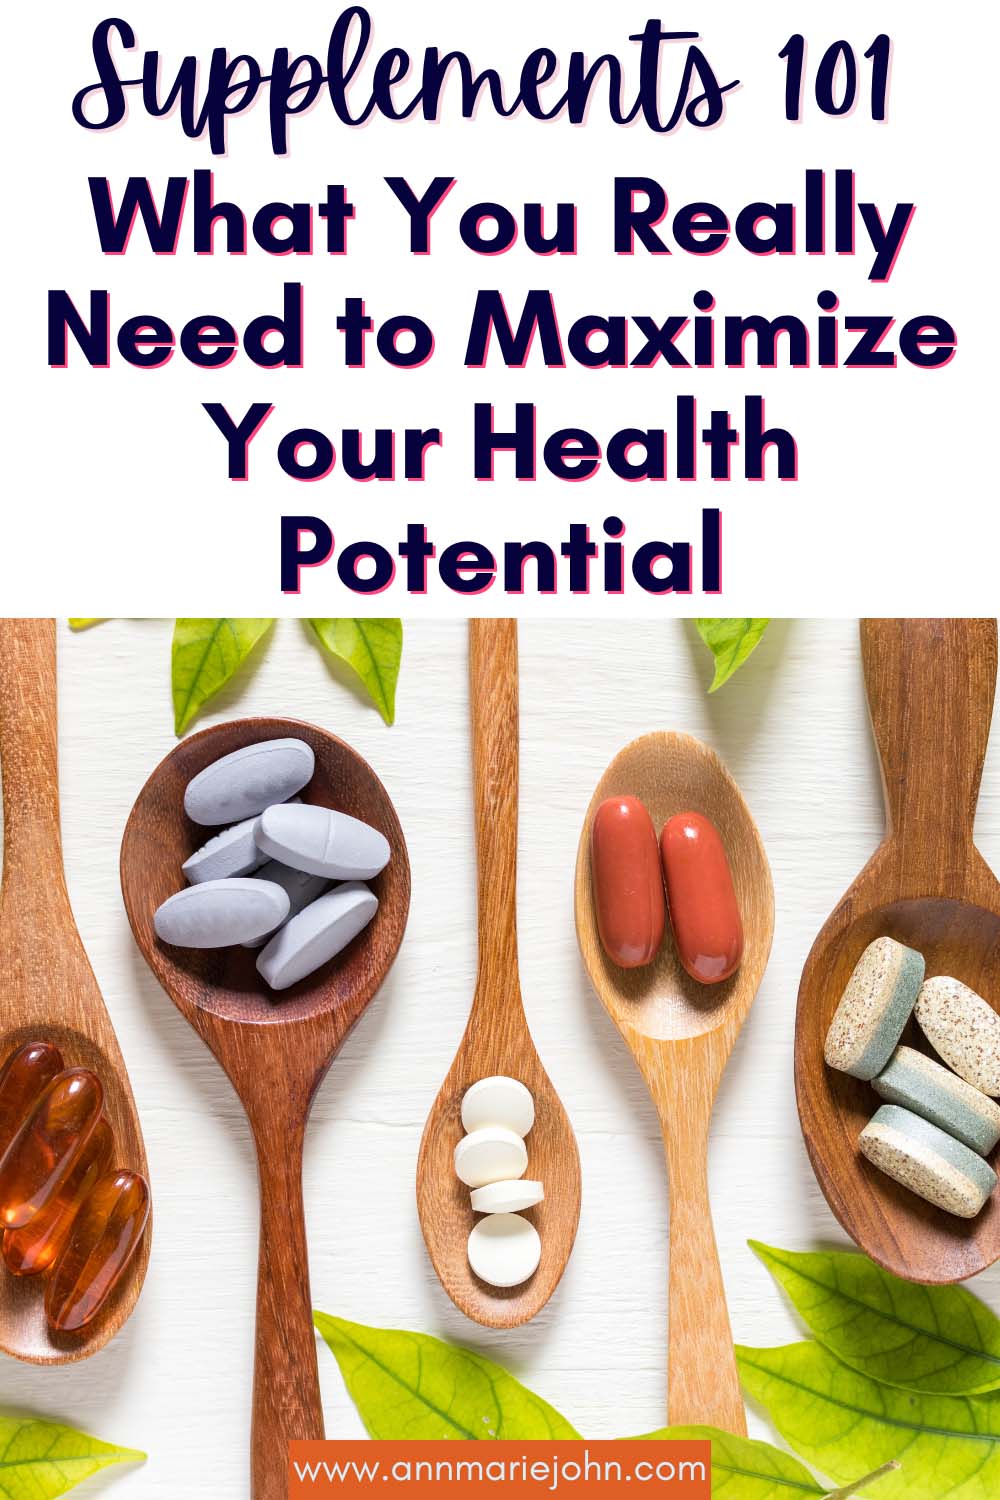 Supplements 101: What You Really Need to Maximize Your Health Potential